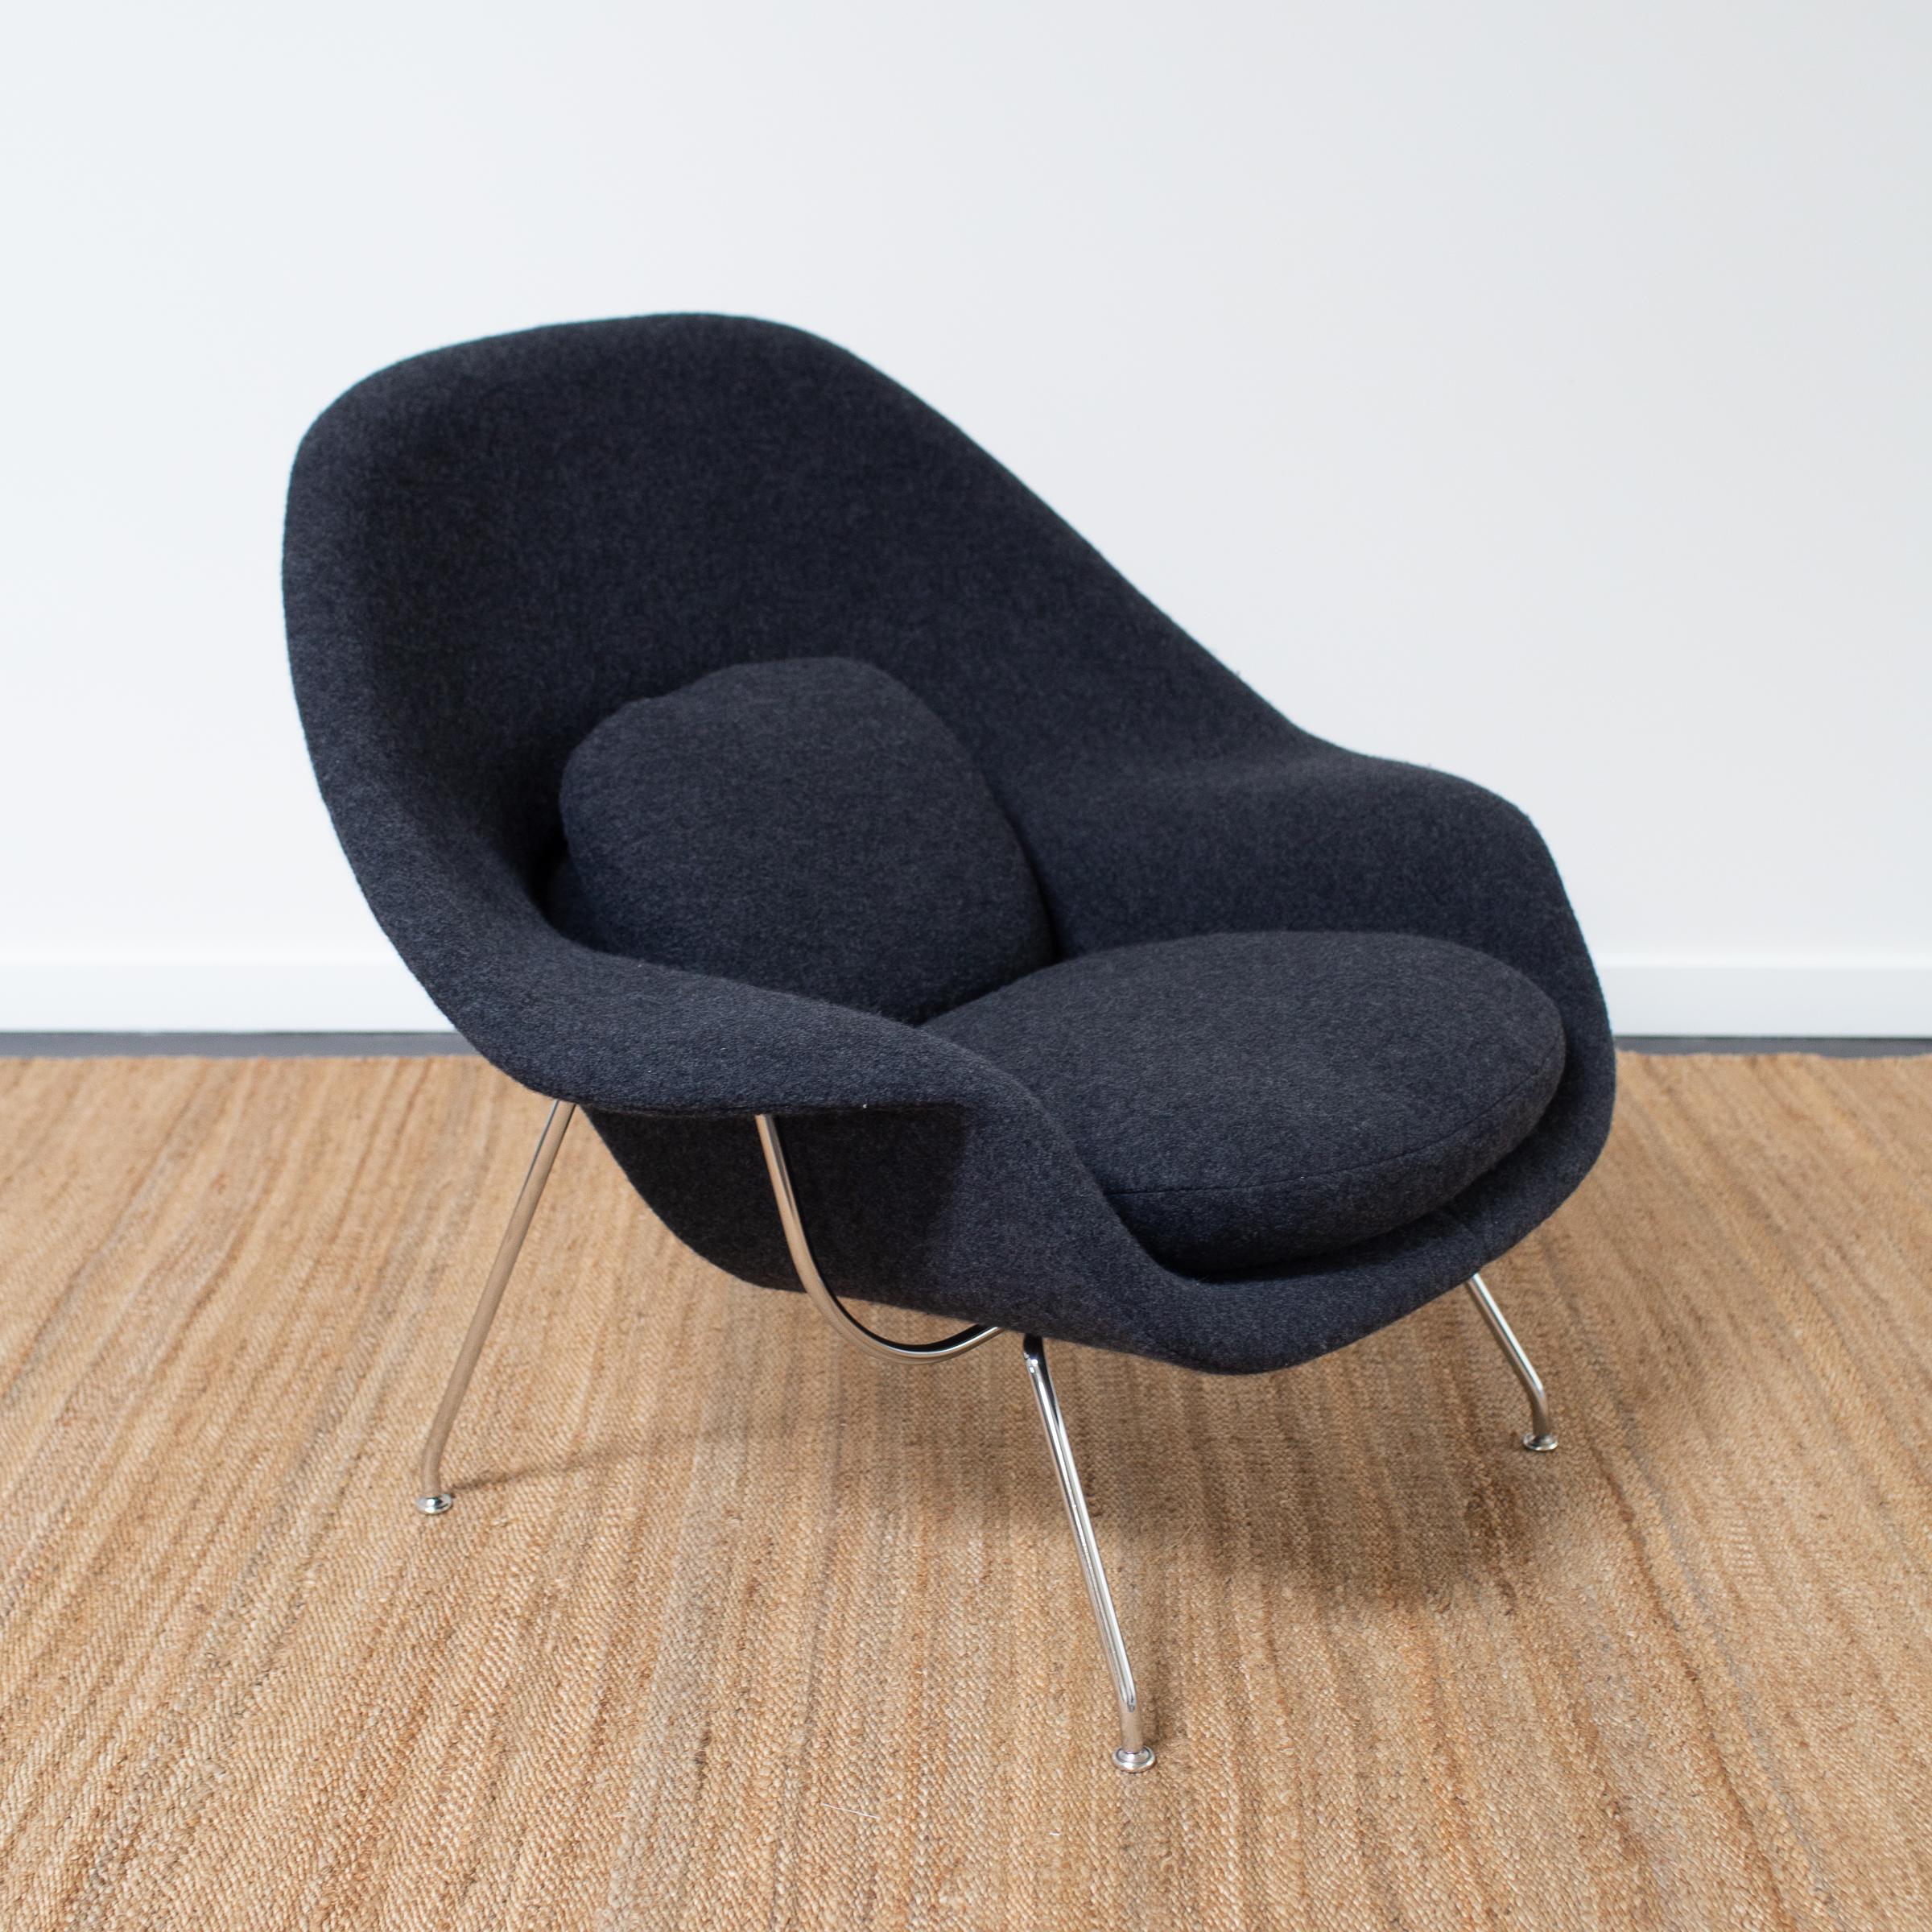 A vintage Womb chair and Ottoman by Eero Saarinen for Knoll International. The chair and ottoman have new feather-down cushions and are reupholstered in a Holland & Sherry boiled wool. 

About Eero Saarinen and the Womb chair
A Finnish born